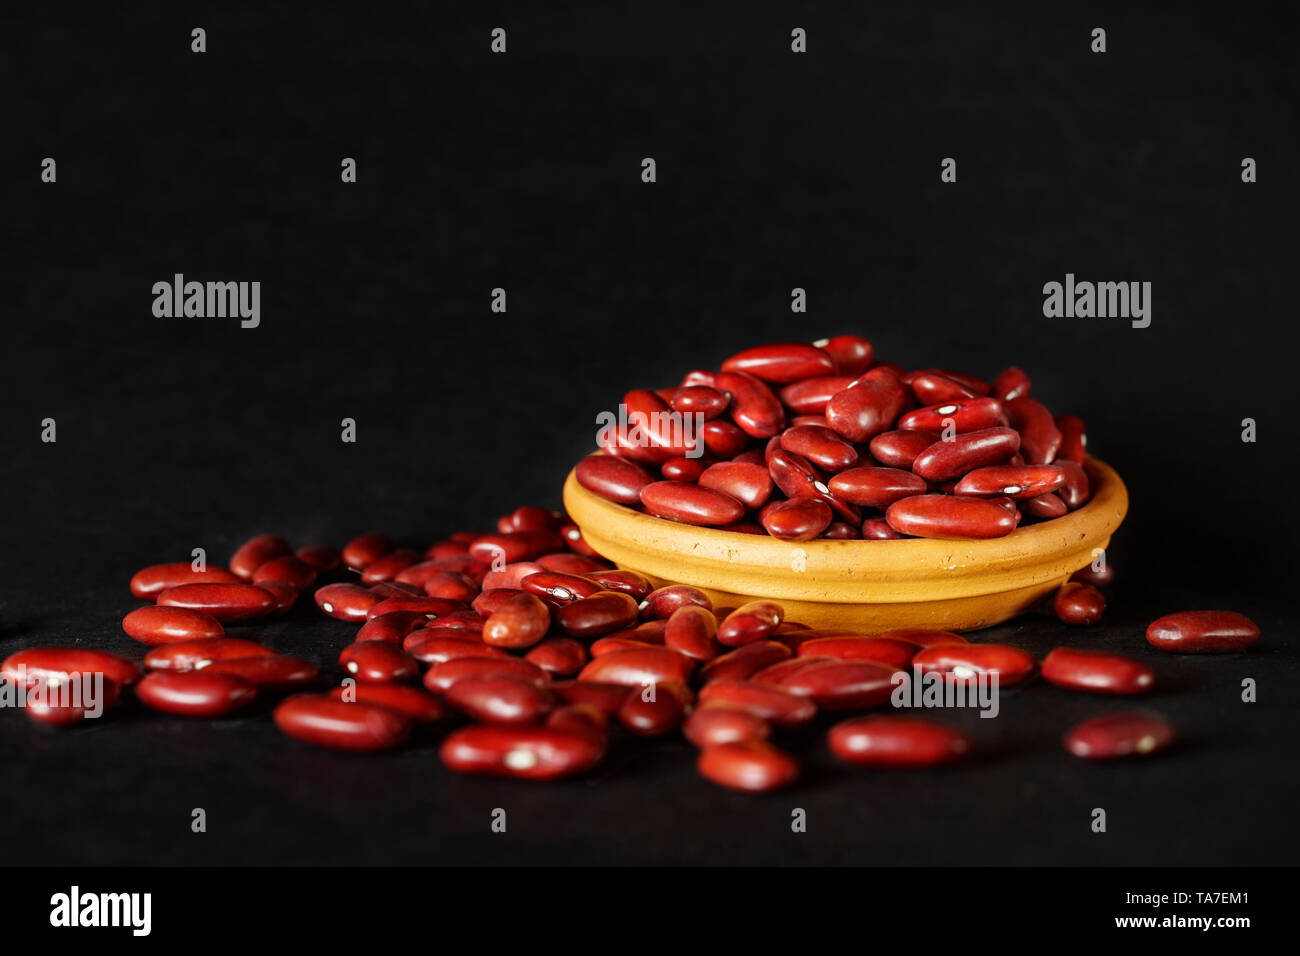 Common red beans -kidney bean - on black background , part of the beans are in a bowl Stock Photo